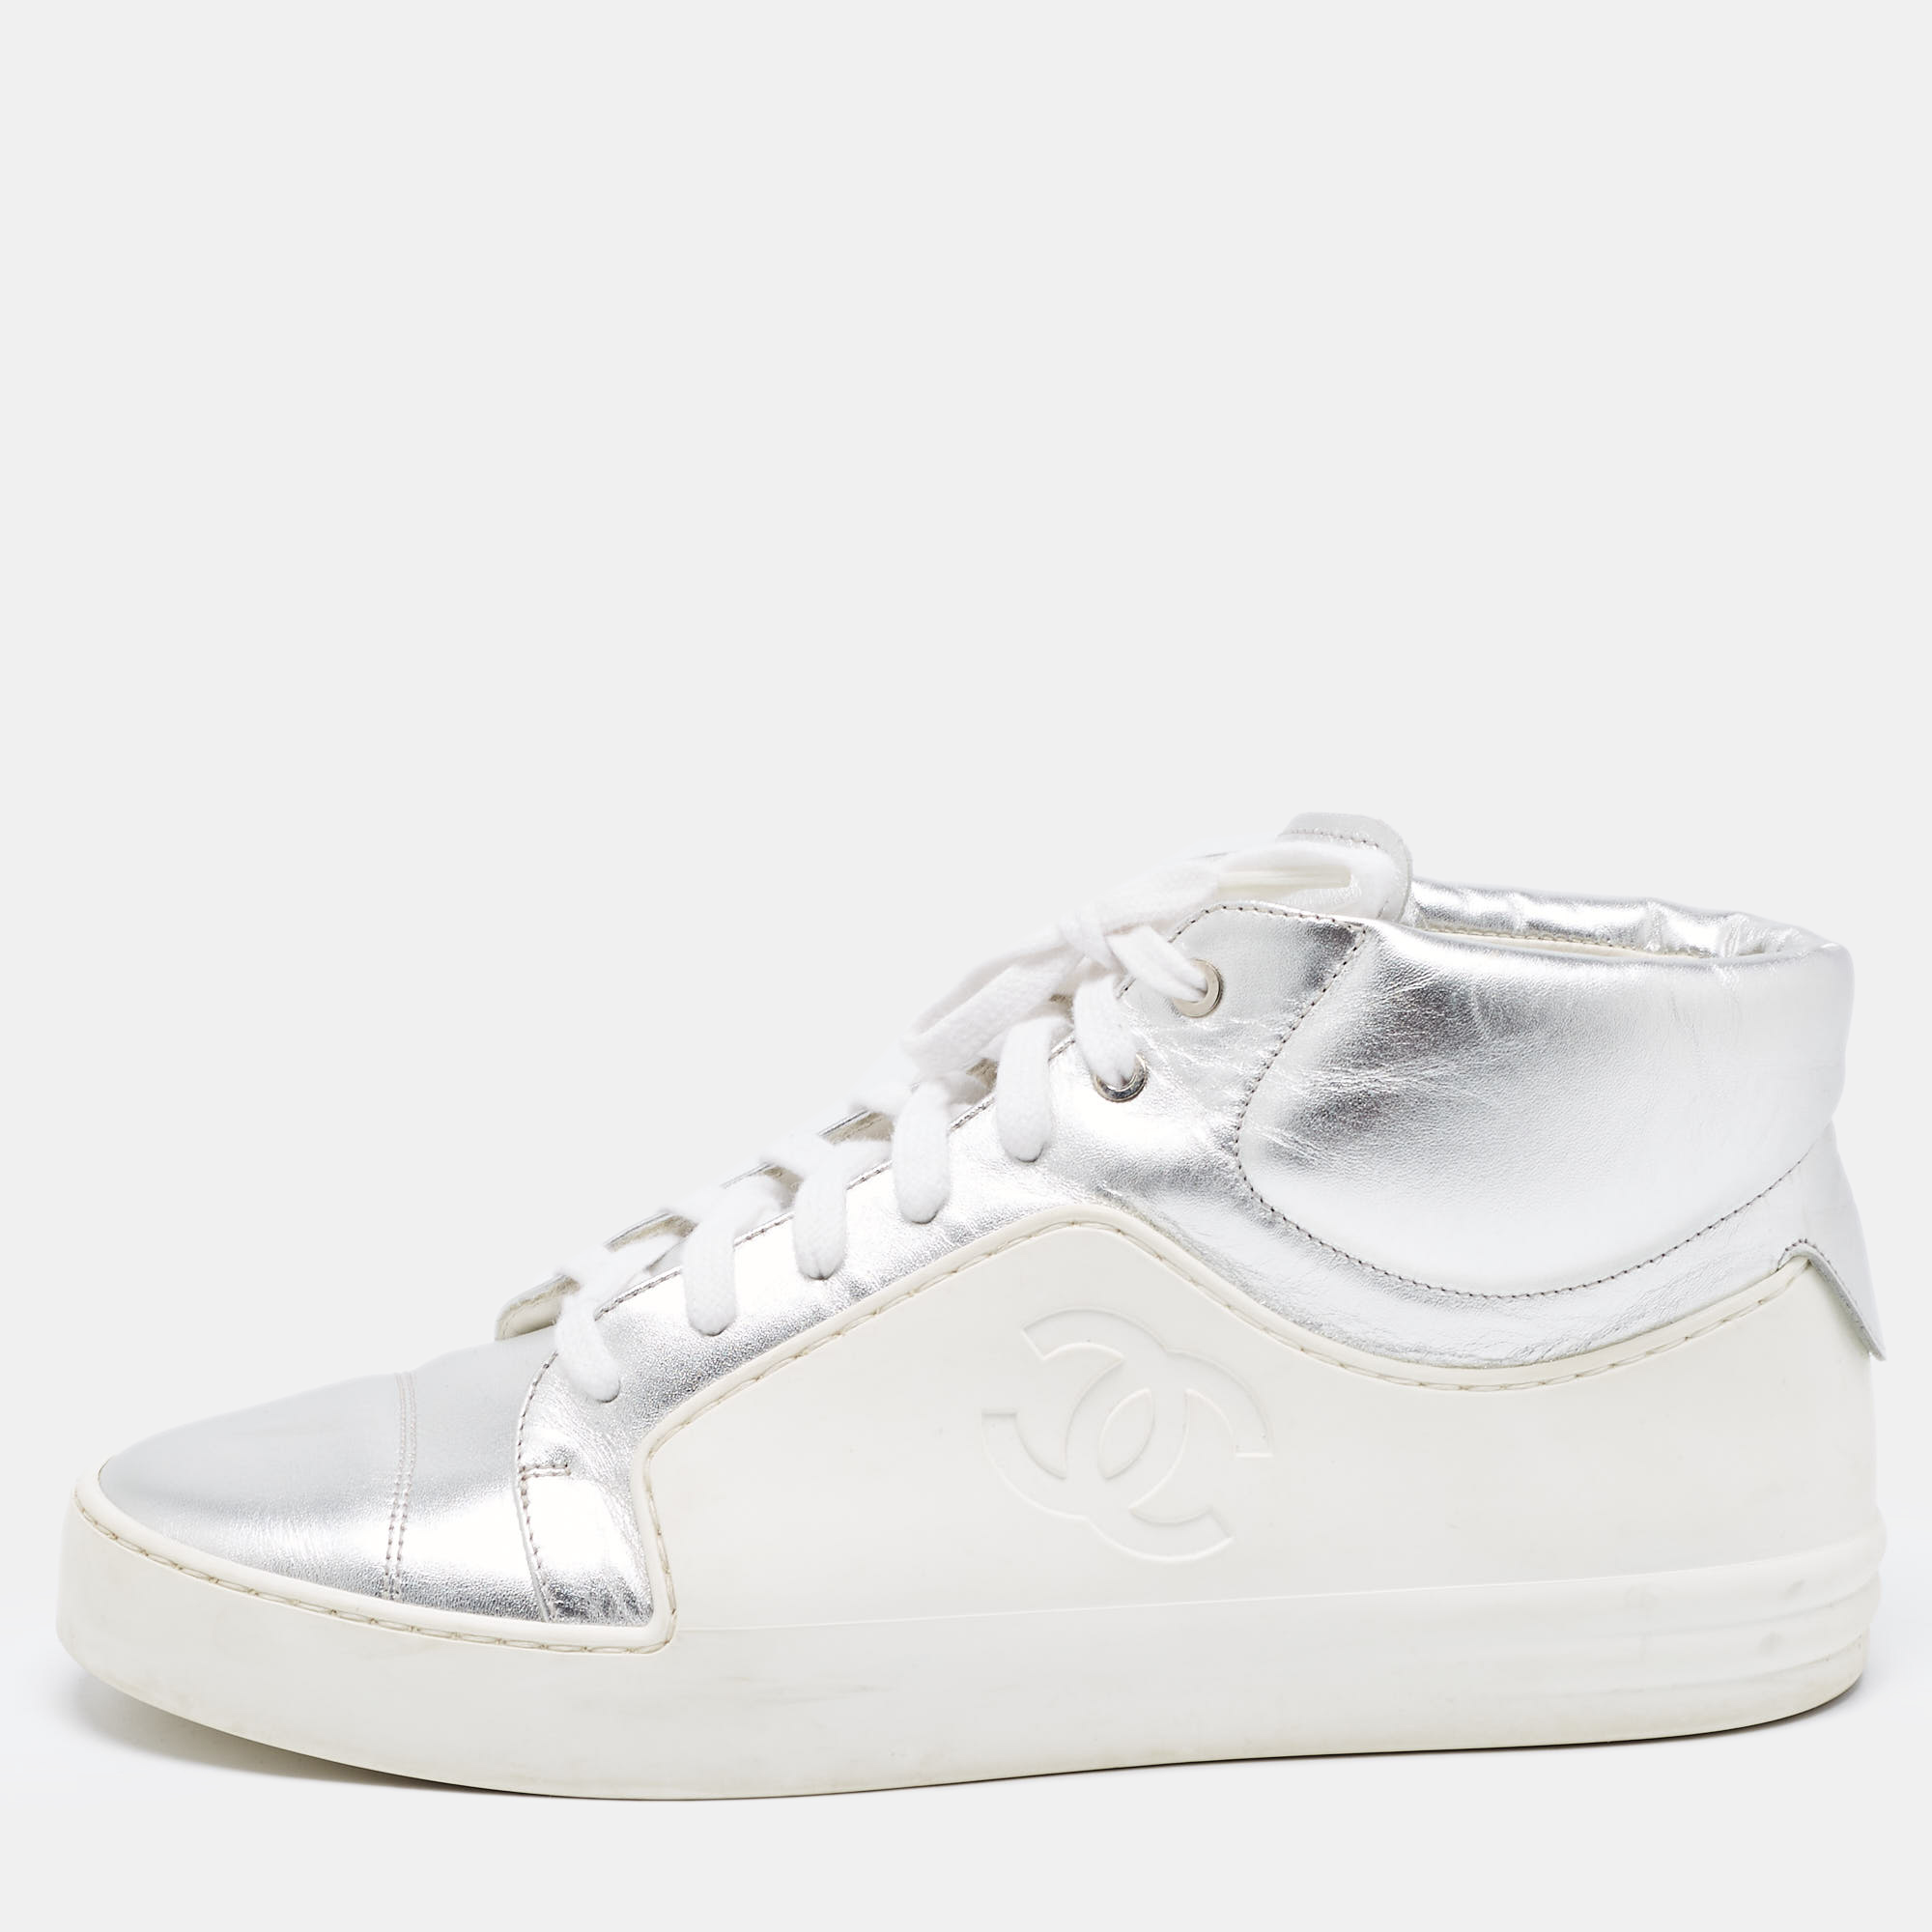 Pre-owned Chanel Metallic Silver/white Leather And Rubber Lace Up High Top Sneakers Size 39.5